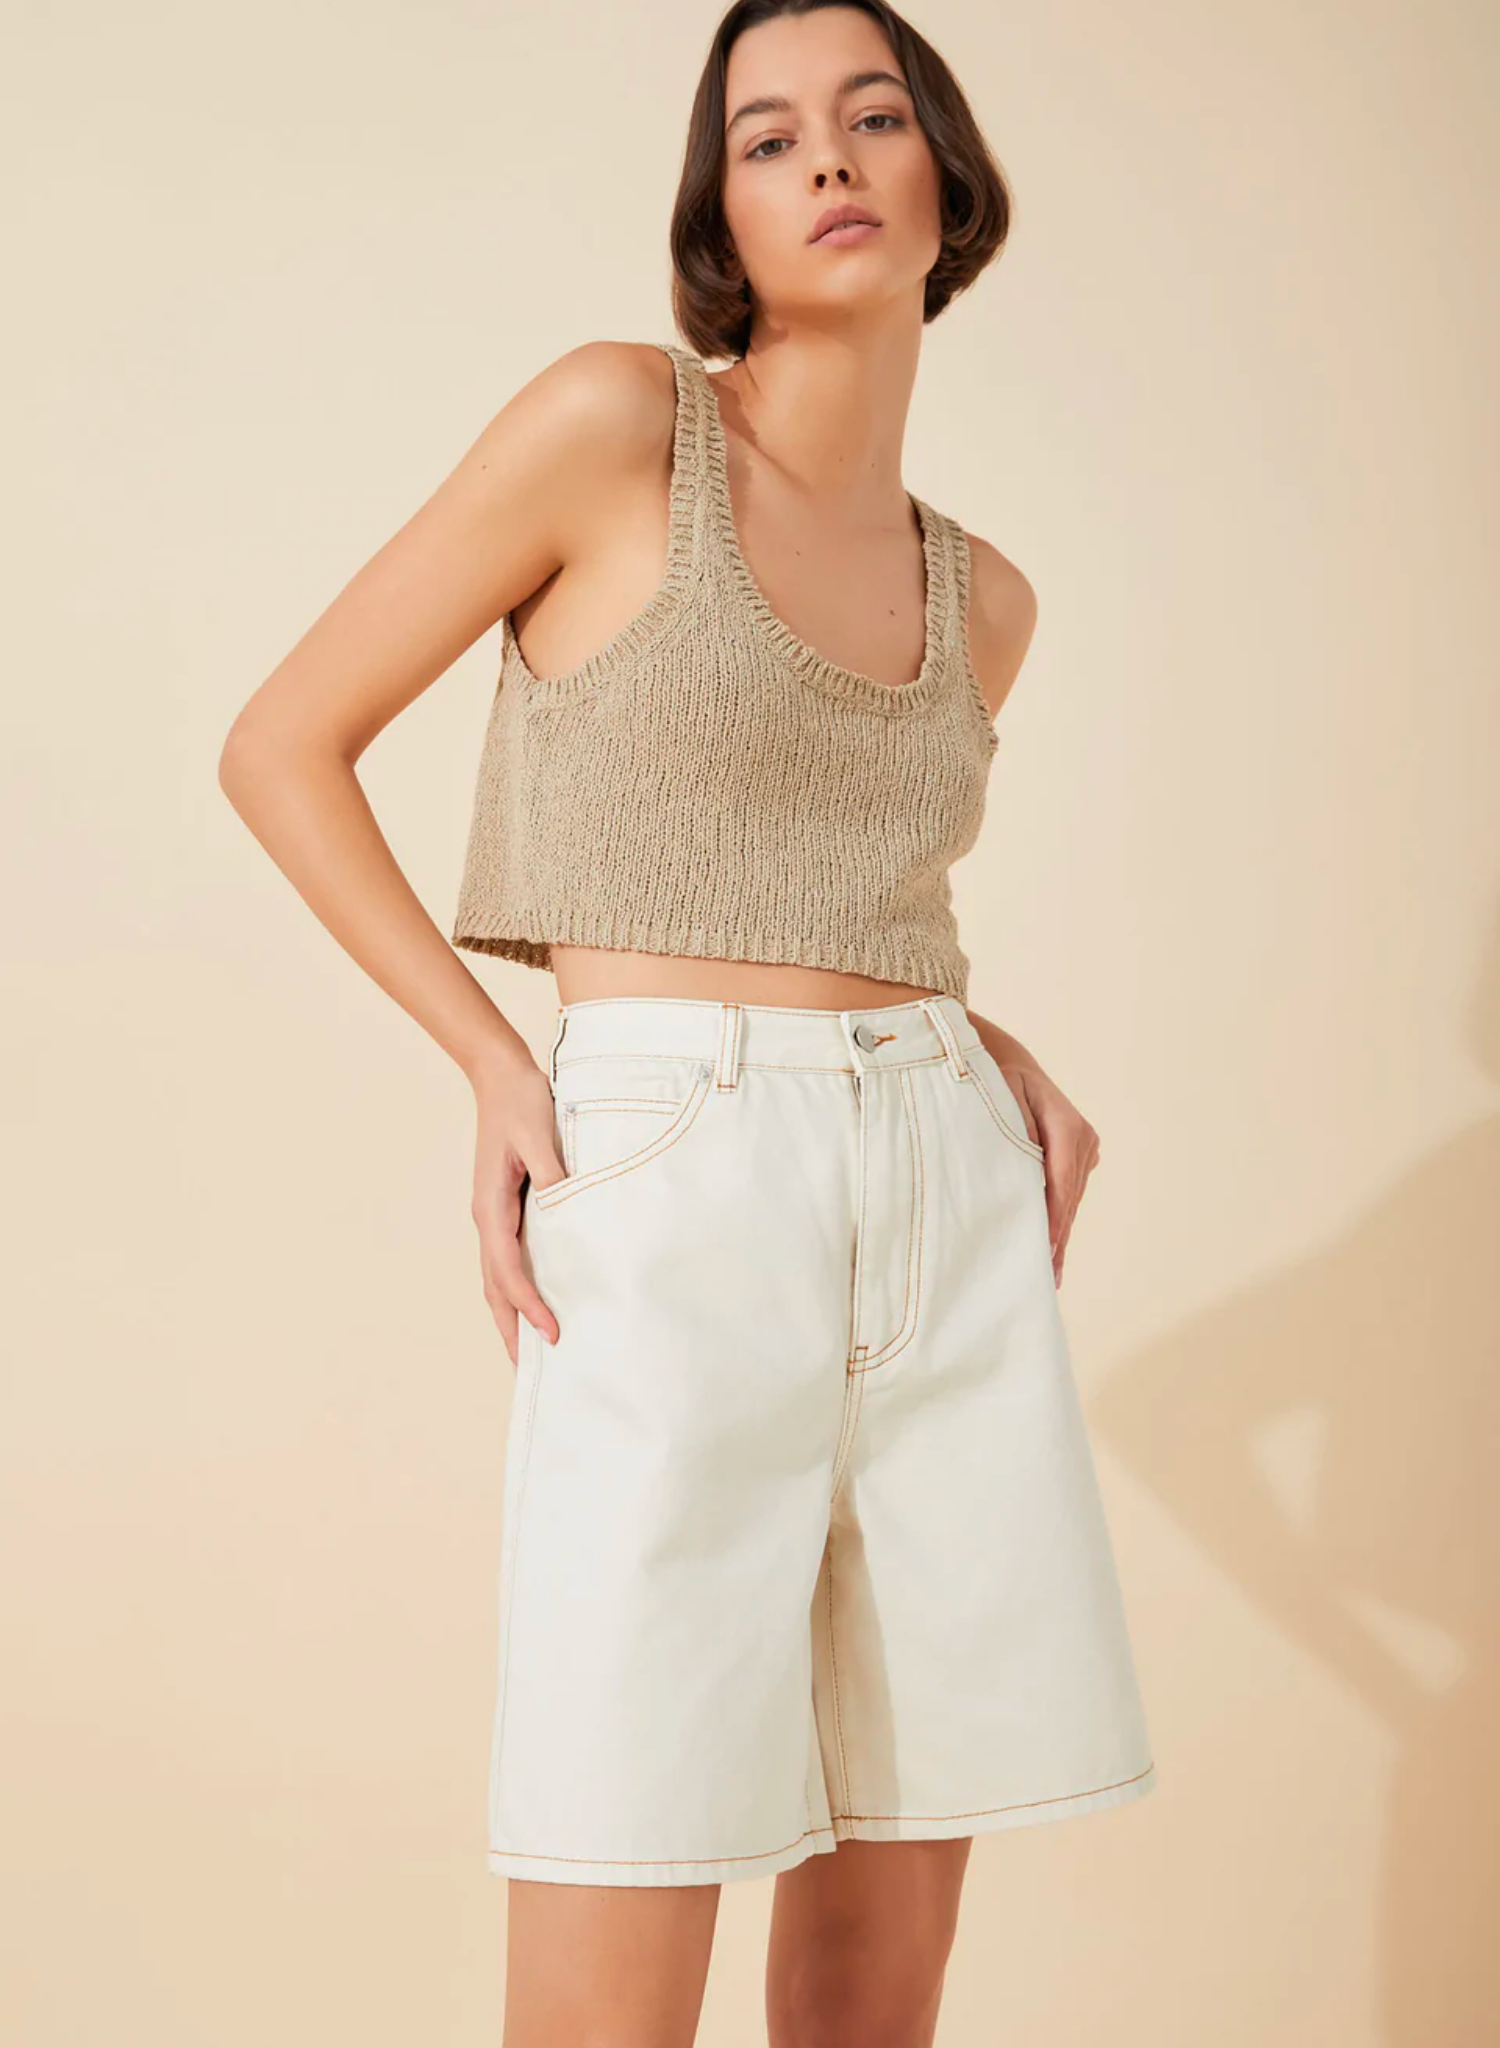 The Husk Textured Cotton Blend Knit Tank by Zulu & Zephyr is spun from a boucle textured, BCI-certified cotton blend yarn. Featuring a scoop neckline and loose cut, this piece is a wardrobe staple that can be styled with a myriad of looks.